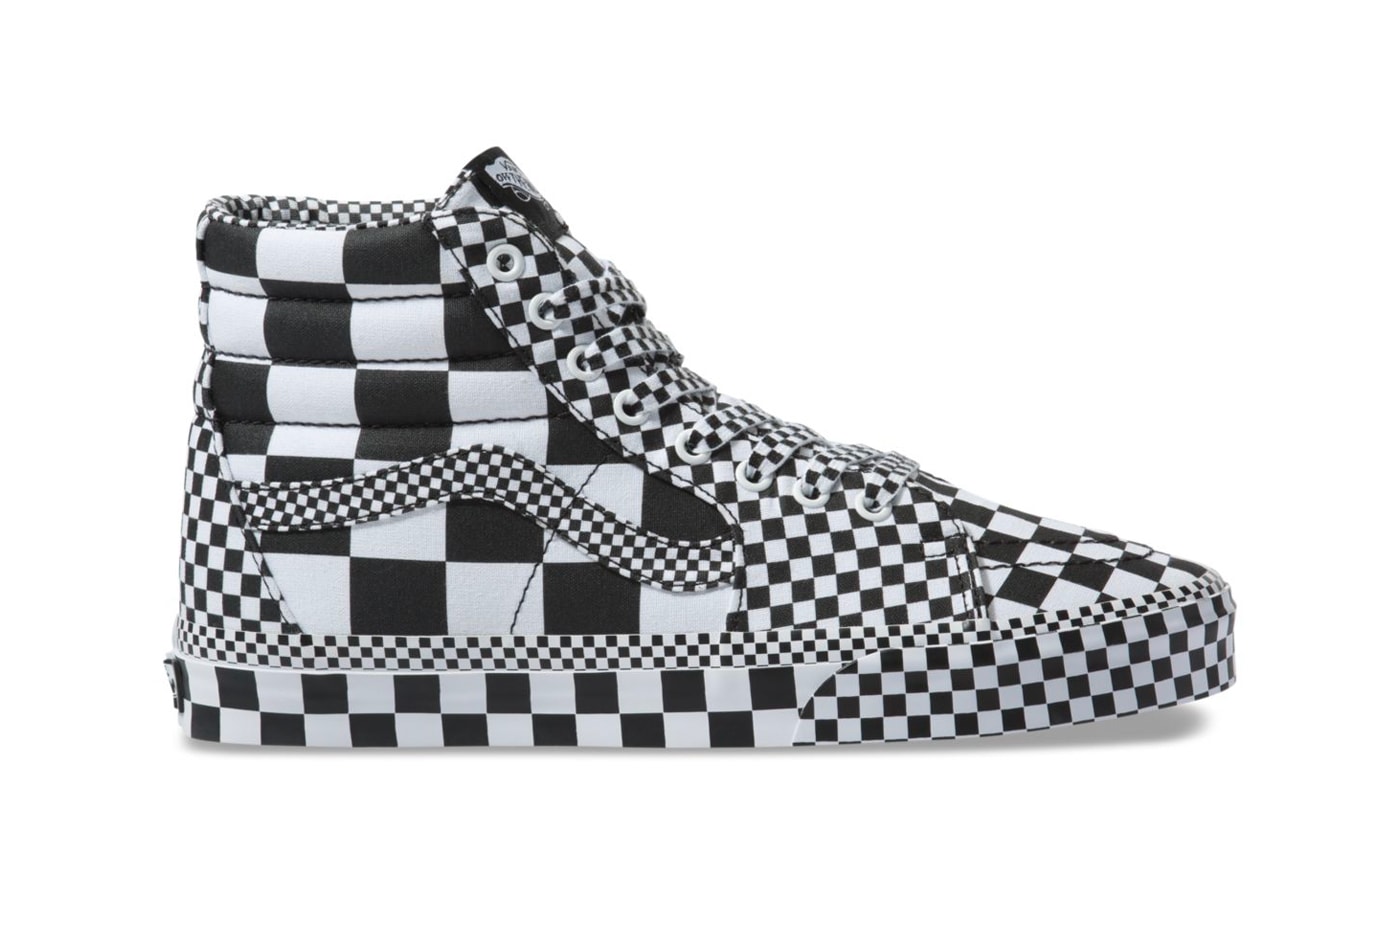 Vans "All Over Checkerboard" Pack Release Info BLACK/TRUE WHITE old skool sk8-hi release date price drop shoes skate lifestyle company brand california